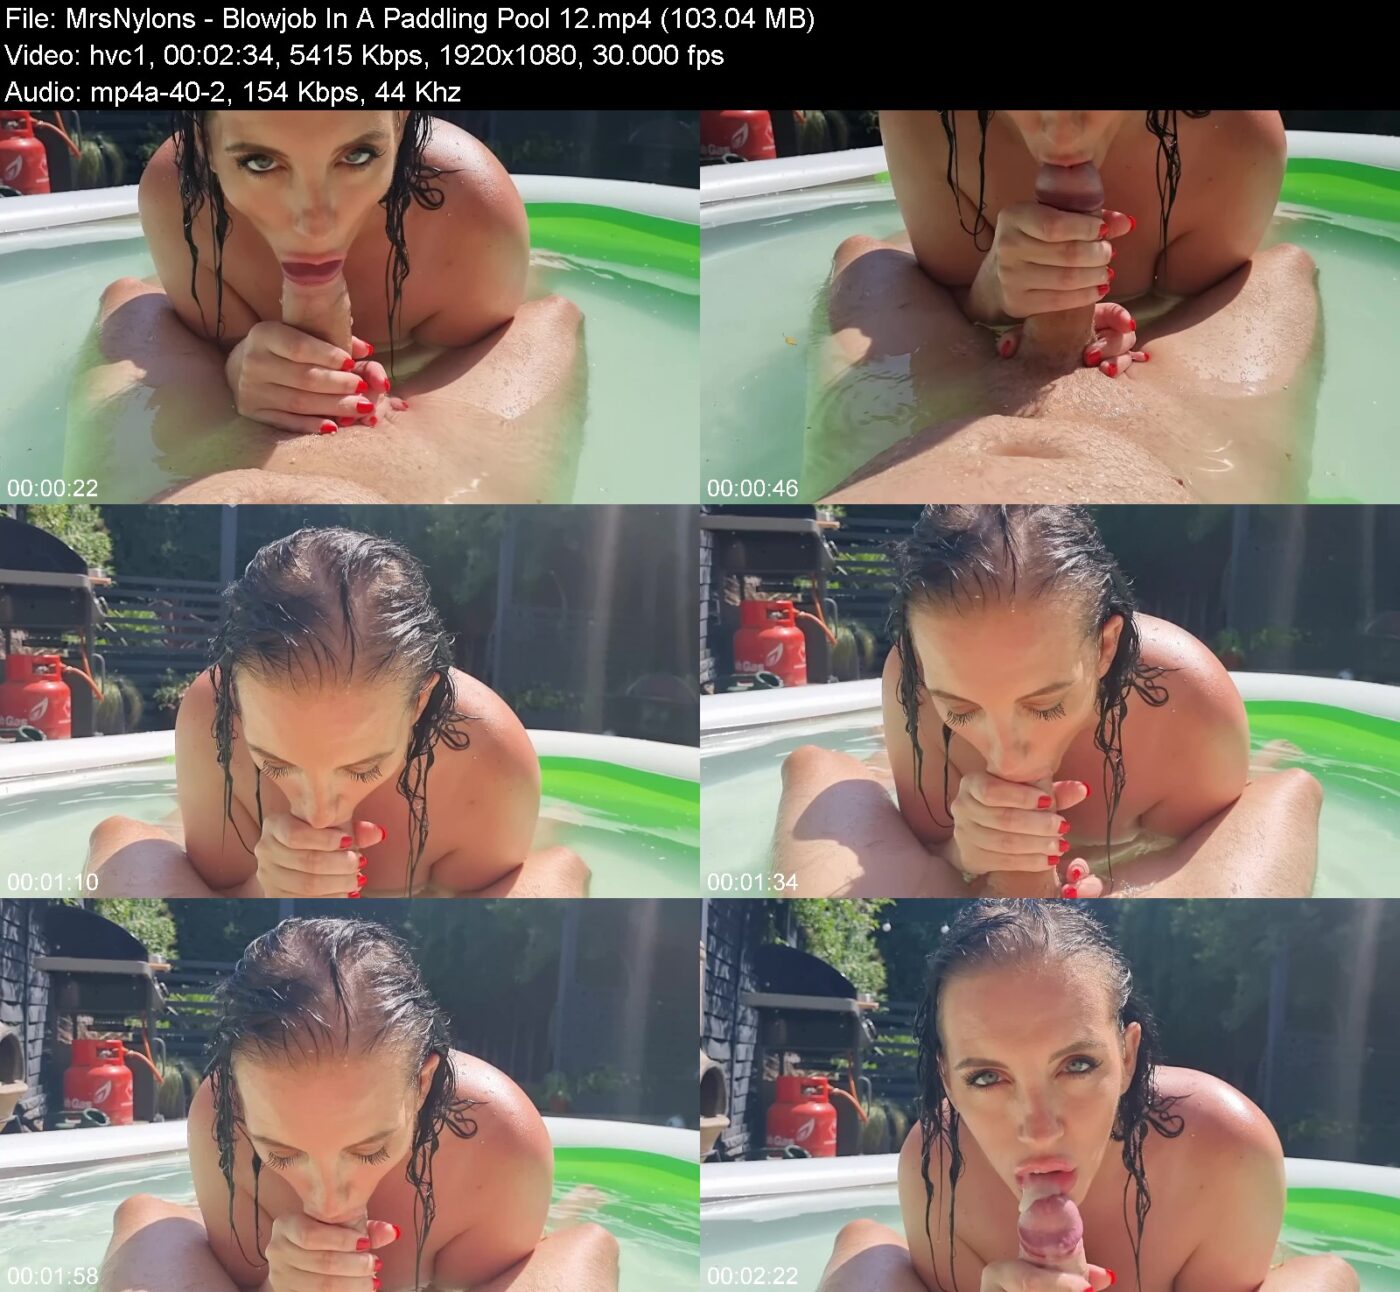 Actress: MrsNylons. Title and Studio: Blowjob In A Paddling Pool 12